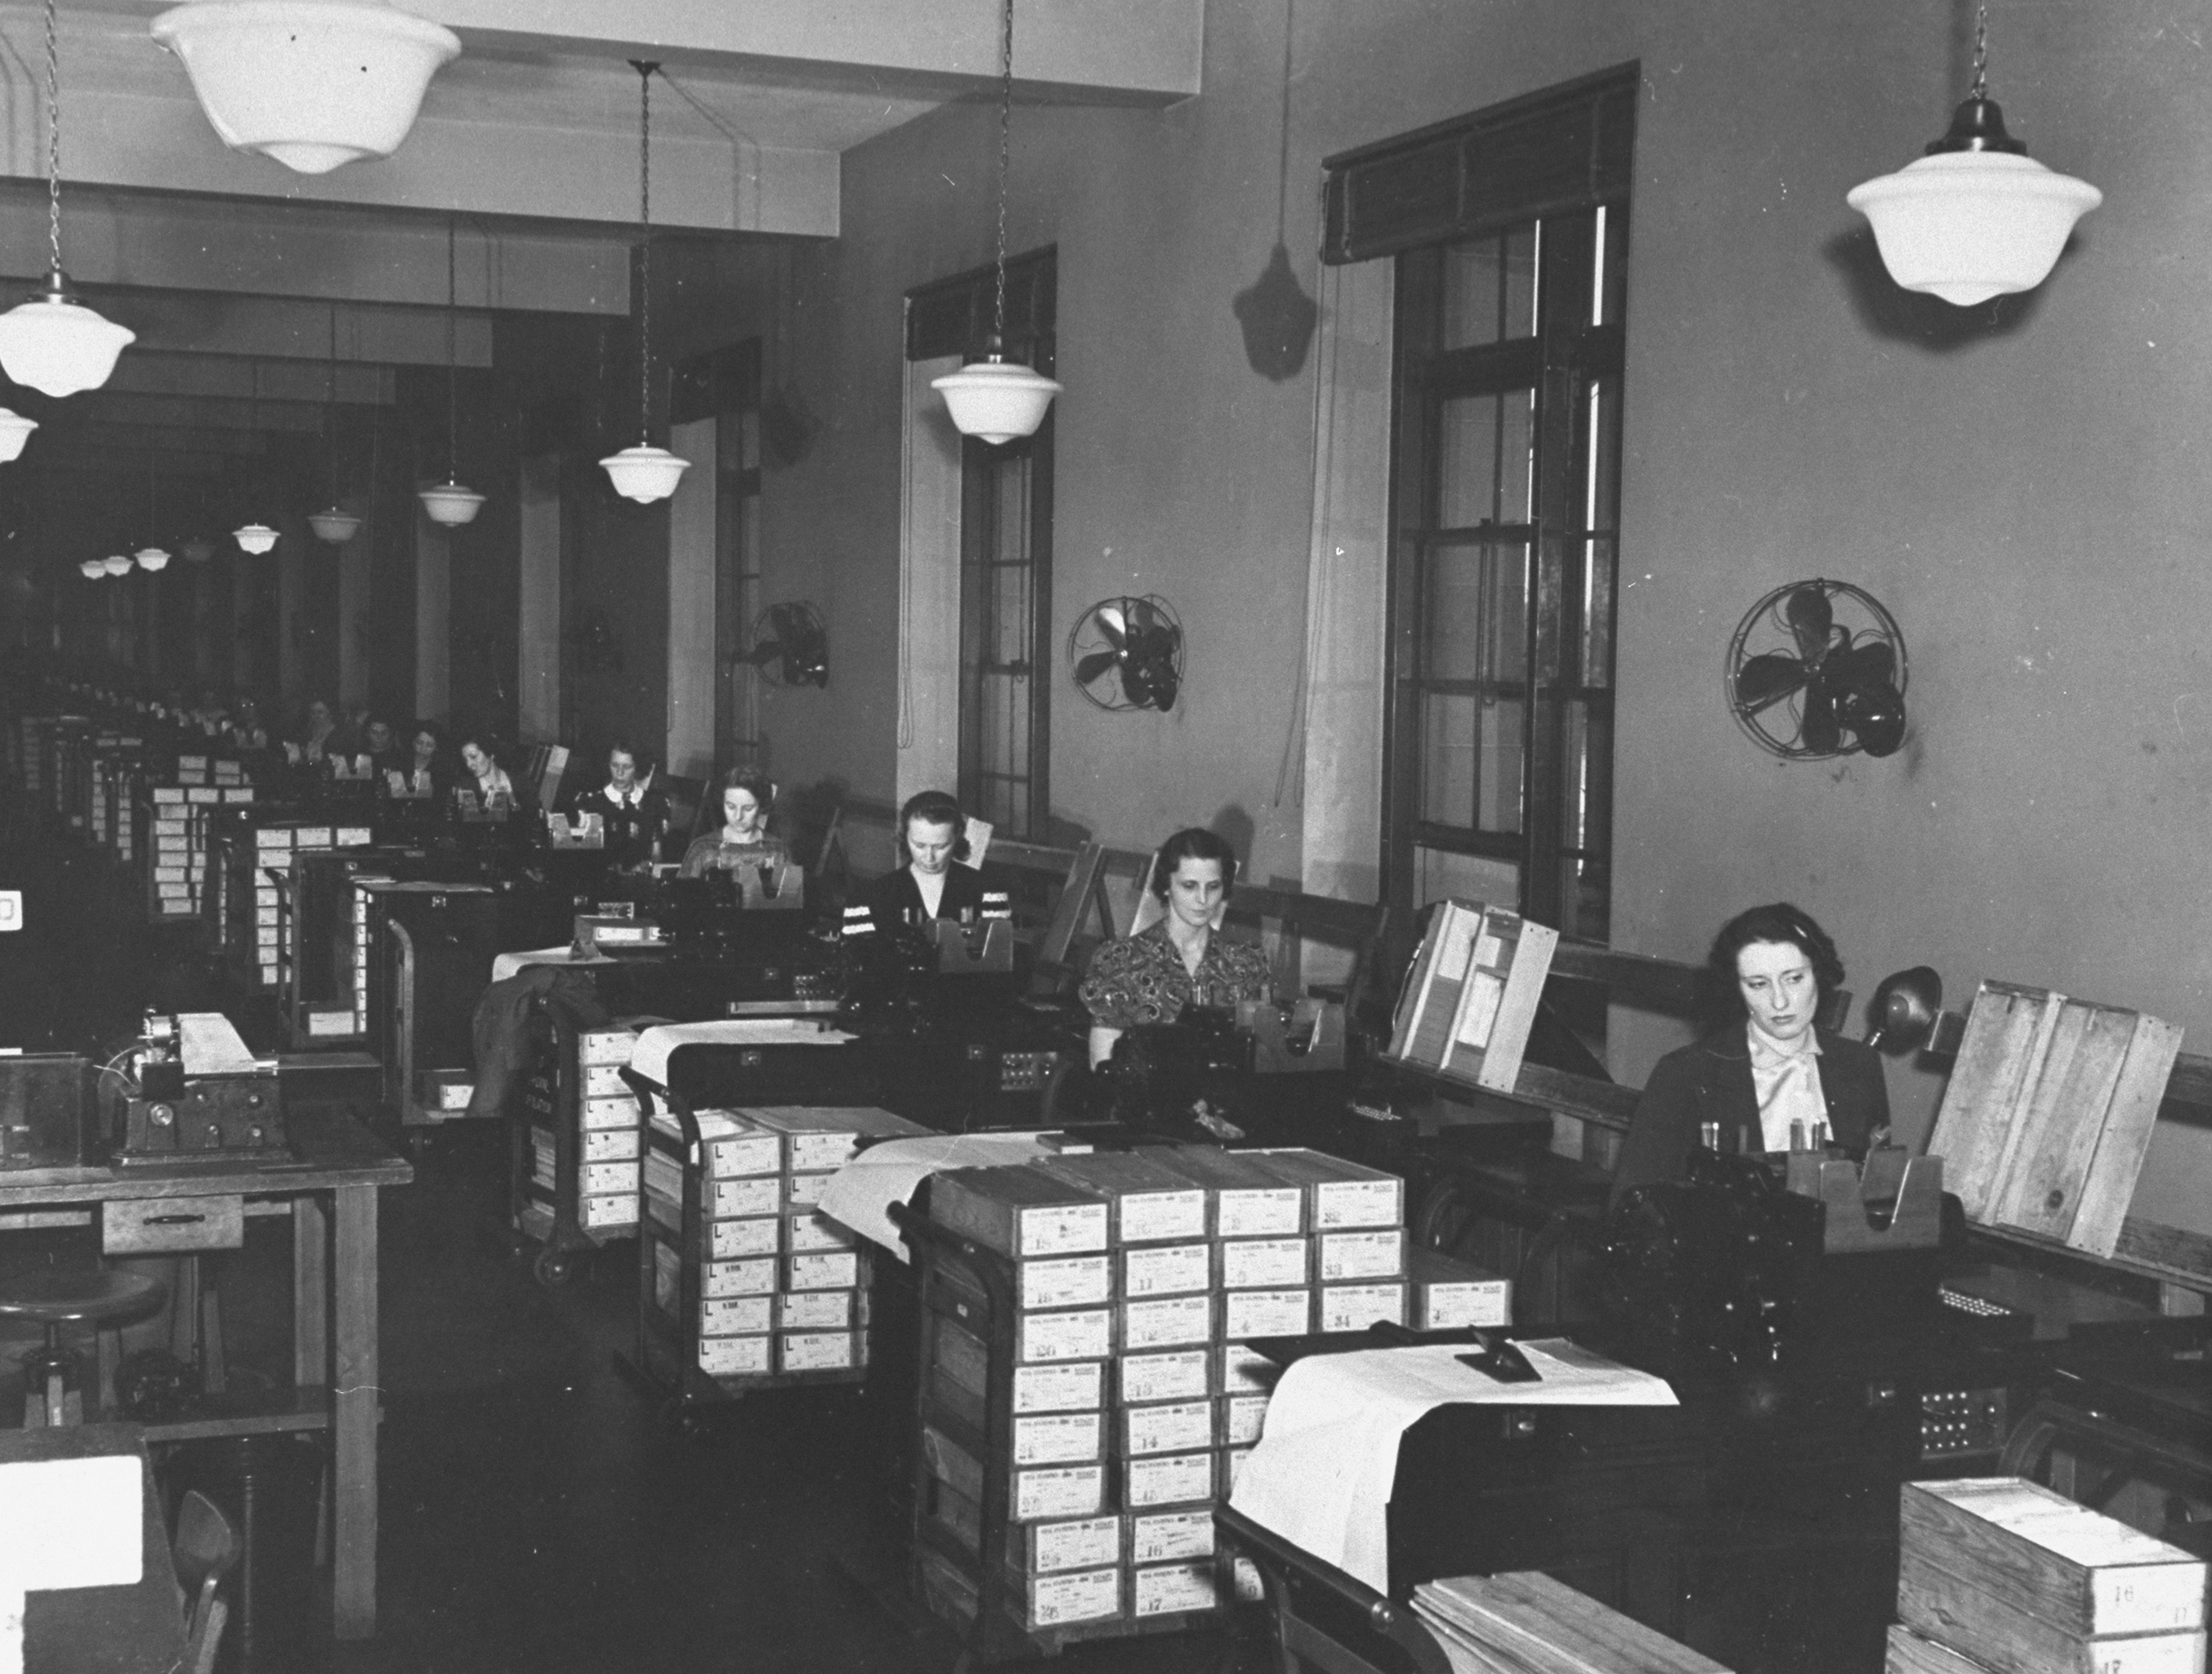 A view of tabulators working at their de